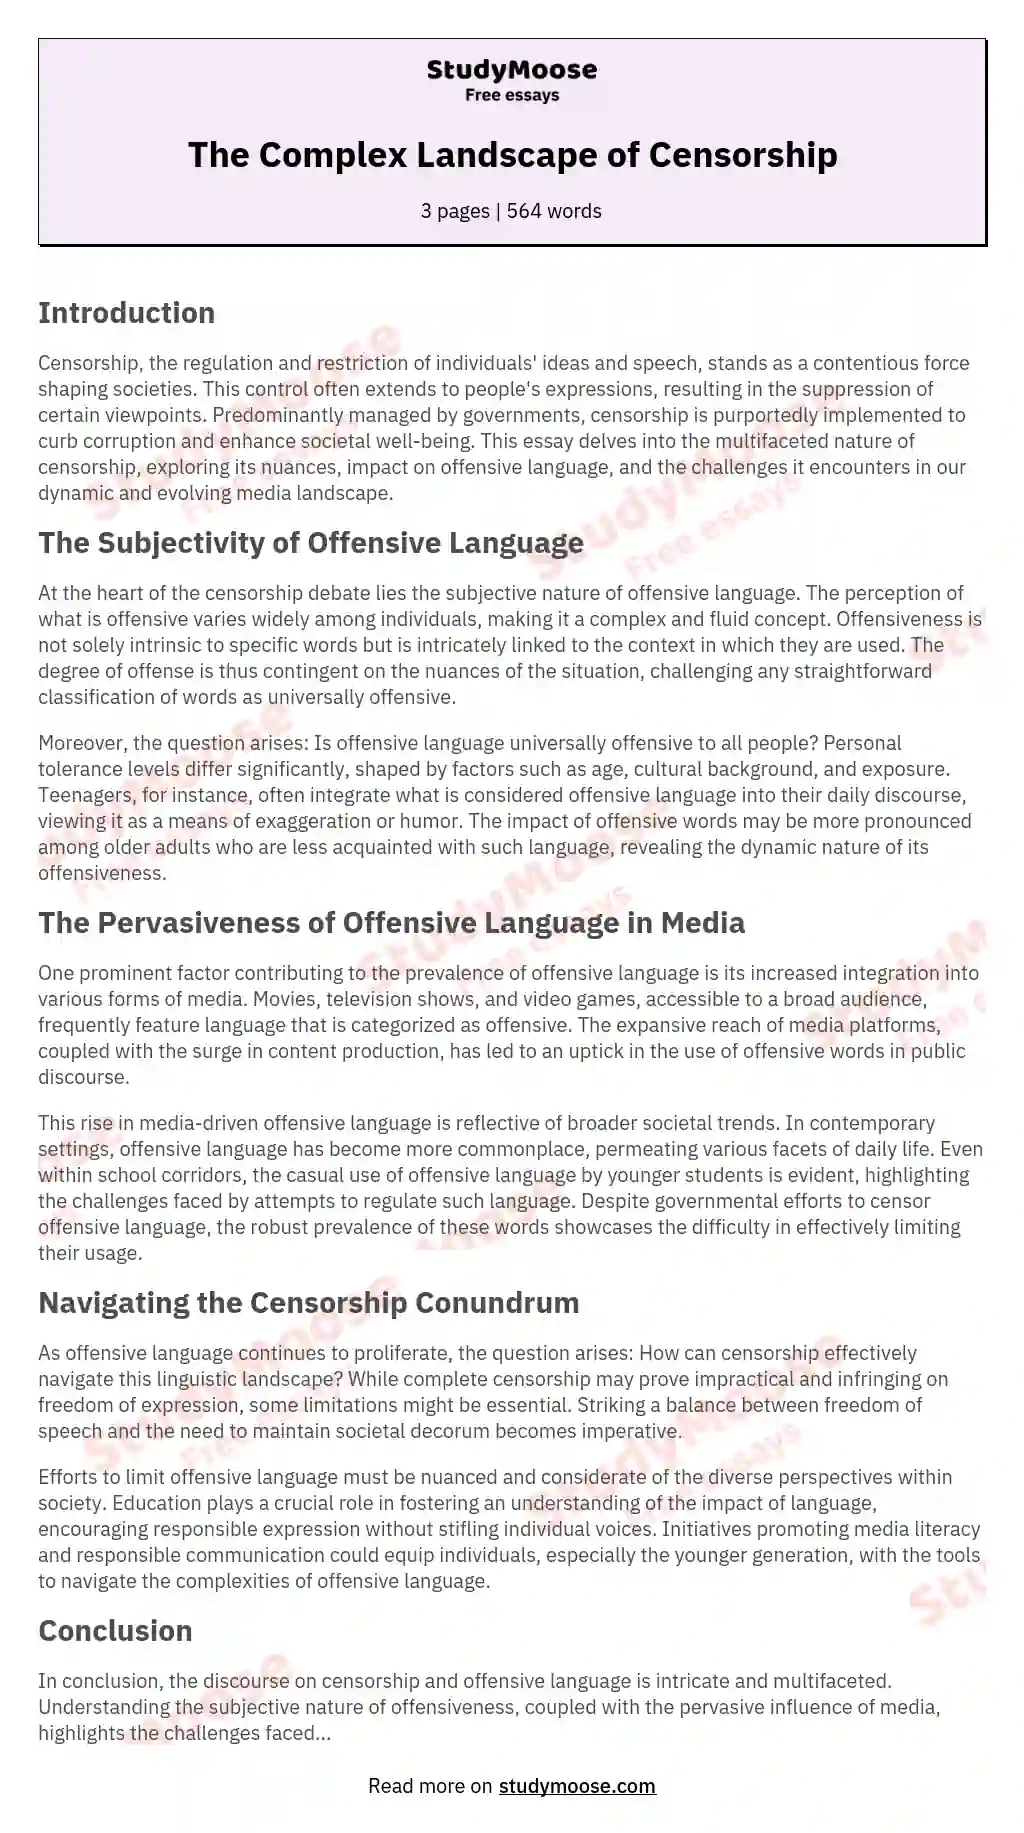 Should offensive language be censored?